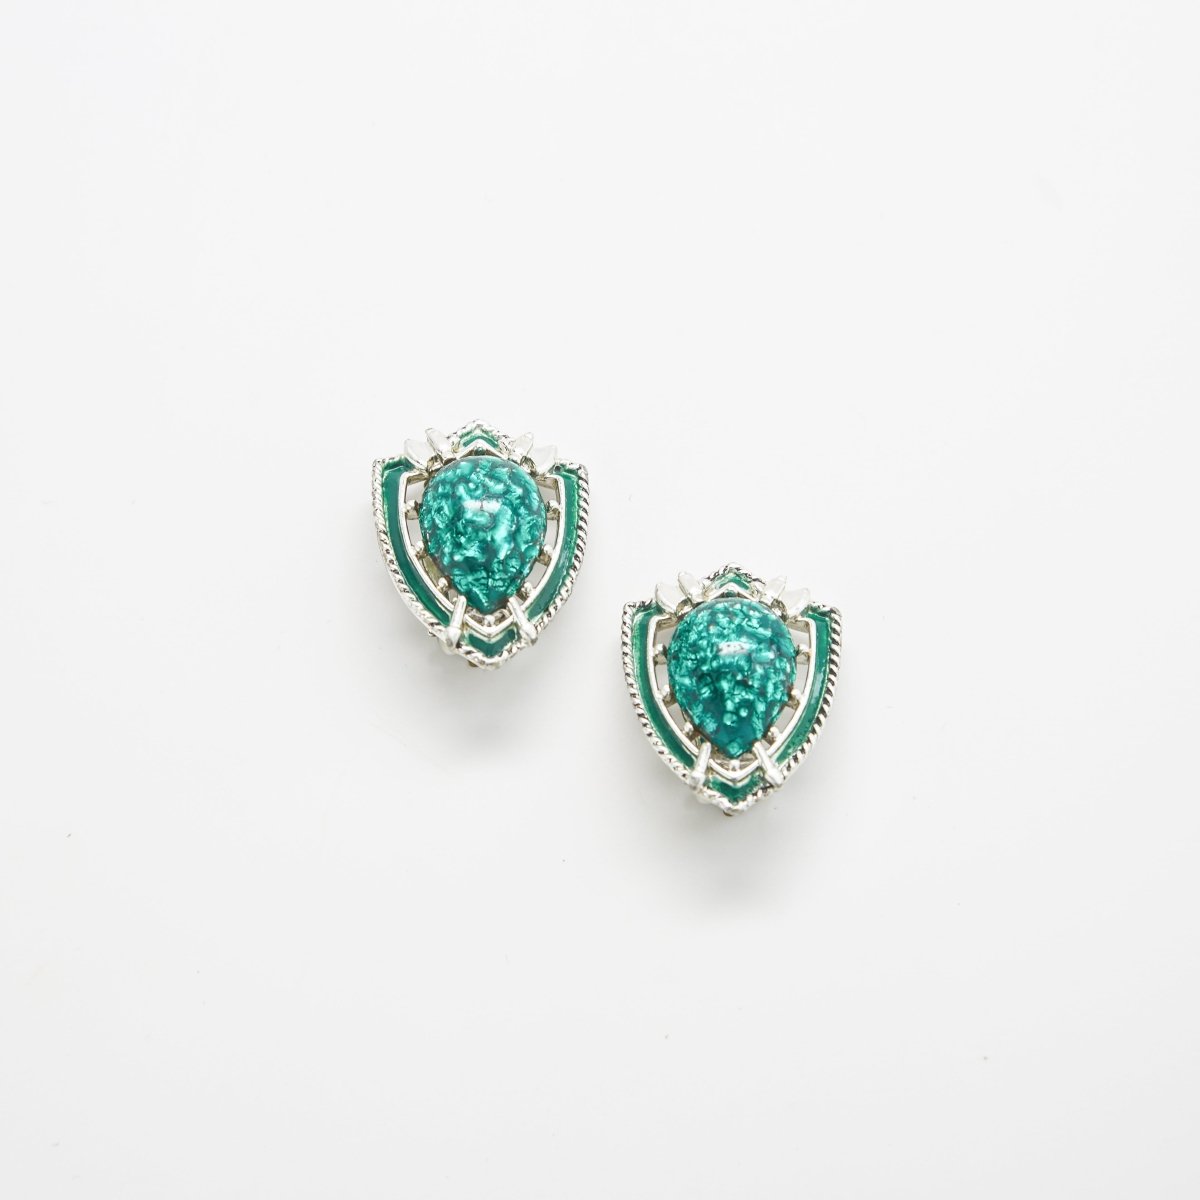 Vintage Silver and Green Shield Earrings - Admiral Row